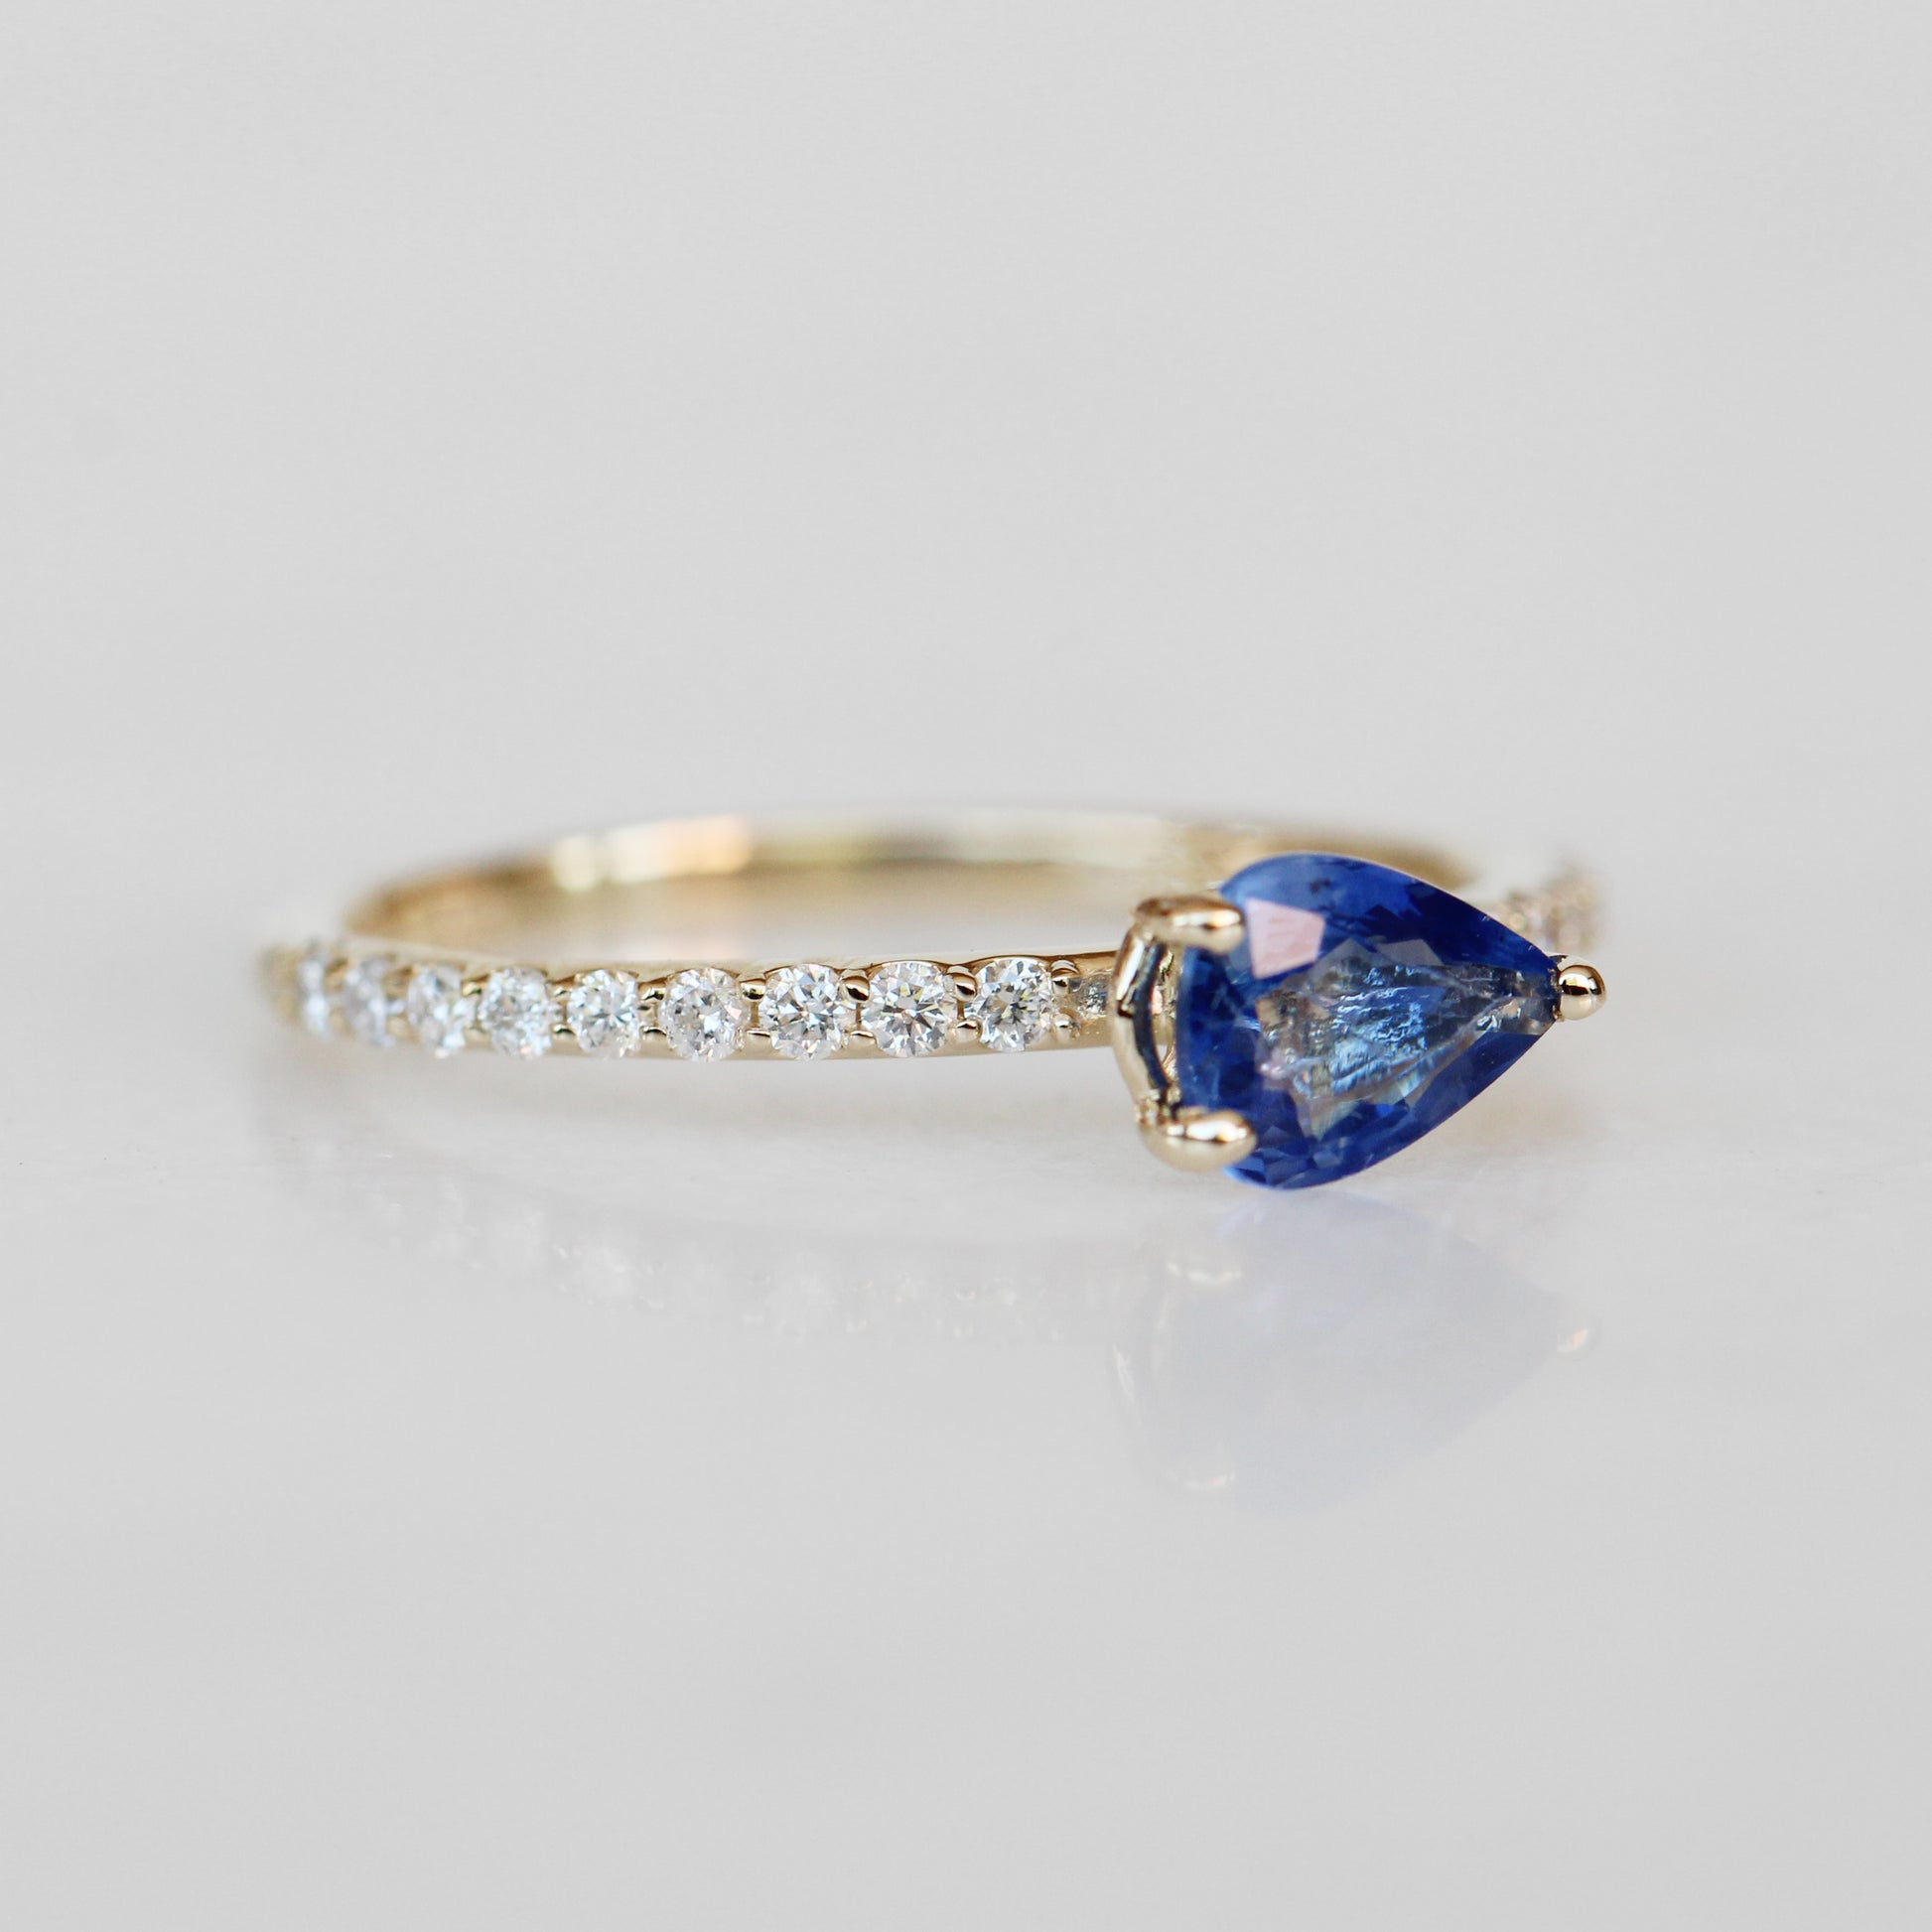 Raine Ring with a Pear Sapphire in 10k Yellow Gold - Ready to Size and Ship - Midwinter Co. Alternative Bridal Rings and Modern Fine Jewelry